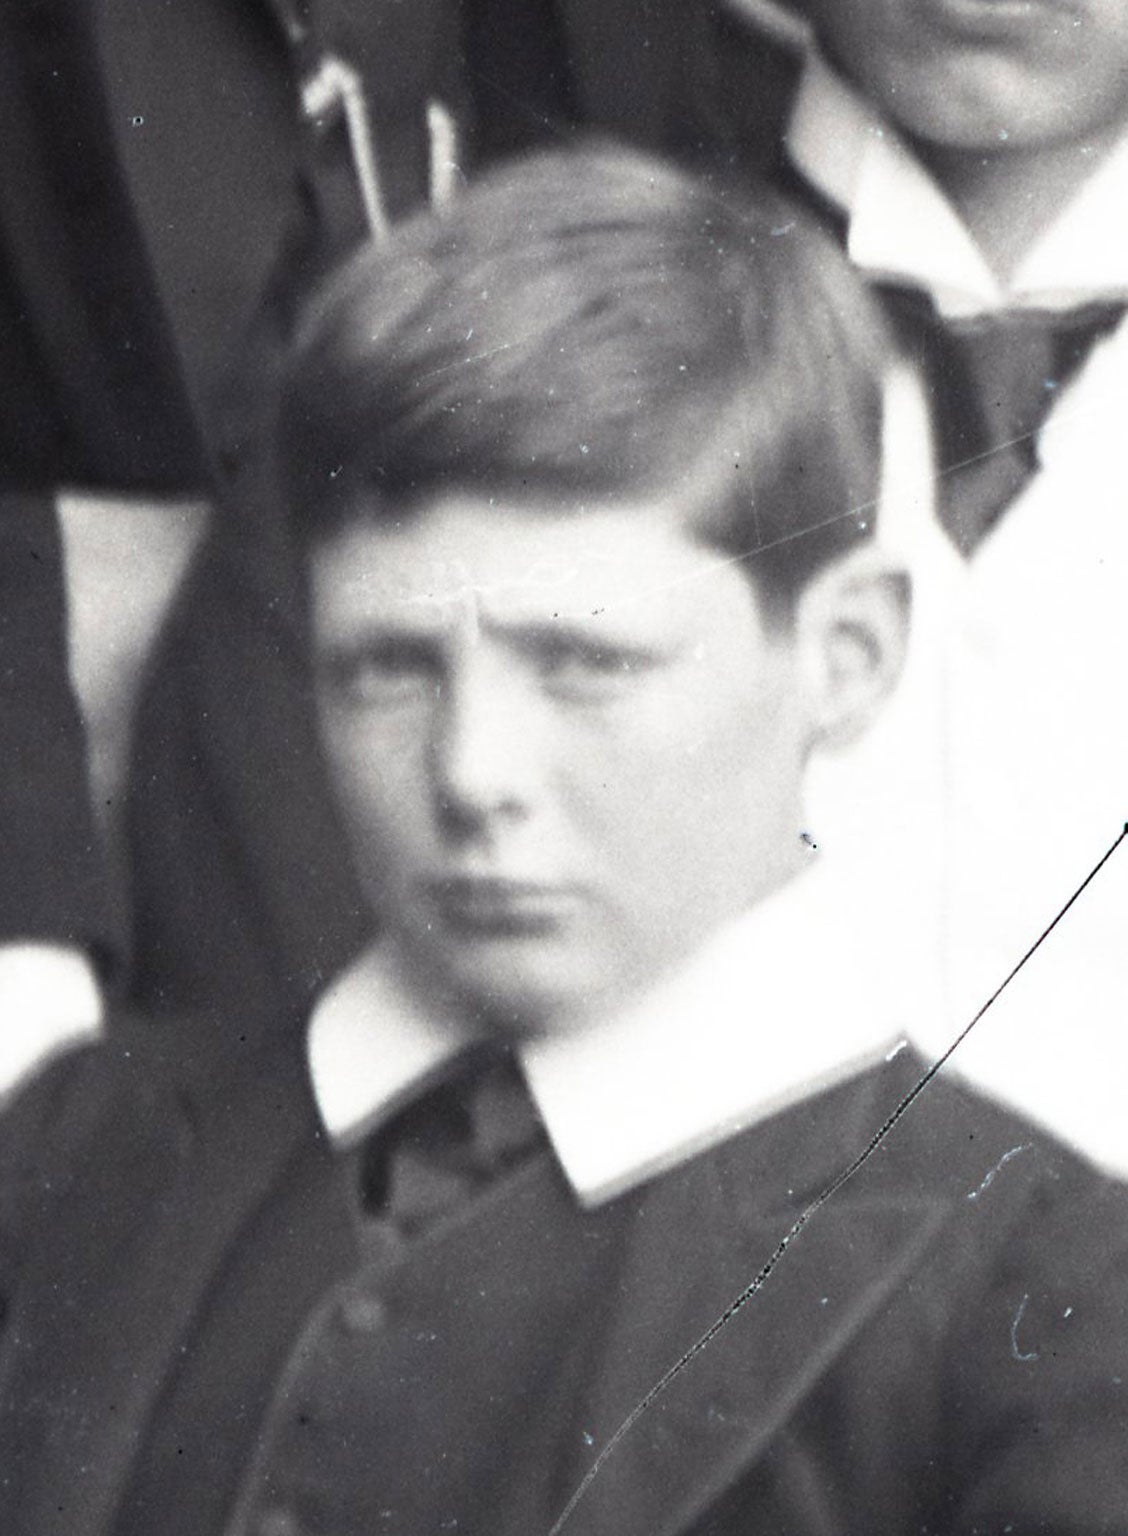 New images released this week show a different side to Winston Churchill, however, hinting at a rather sulky schoolboy persona.